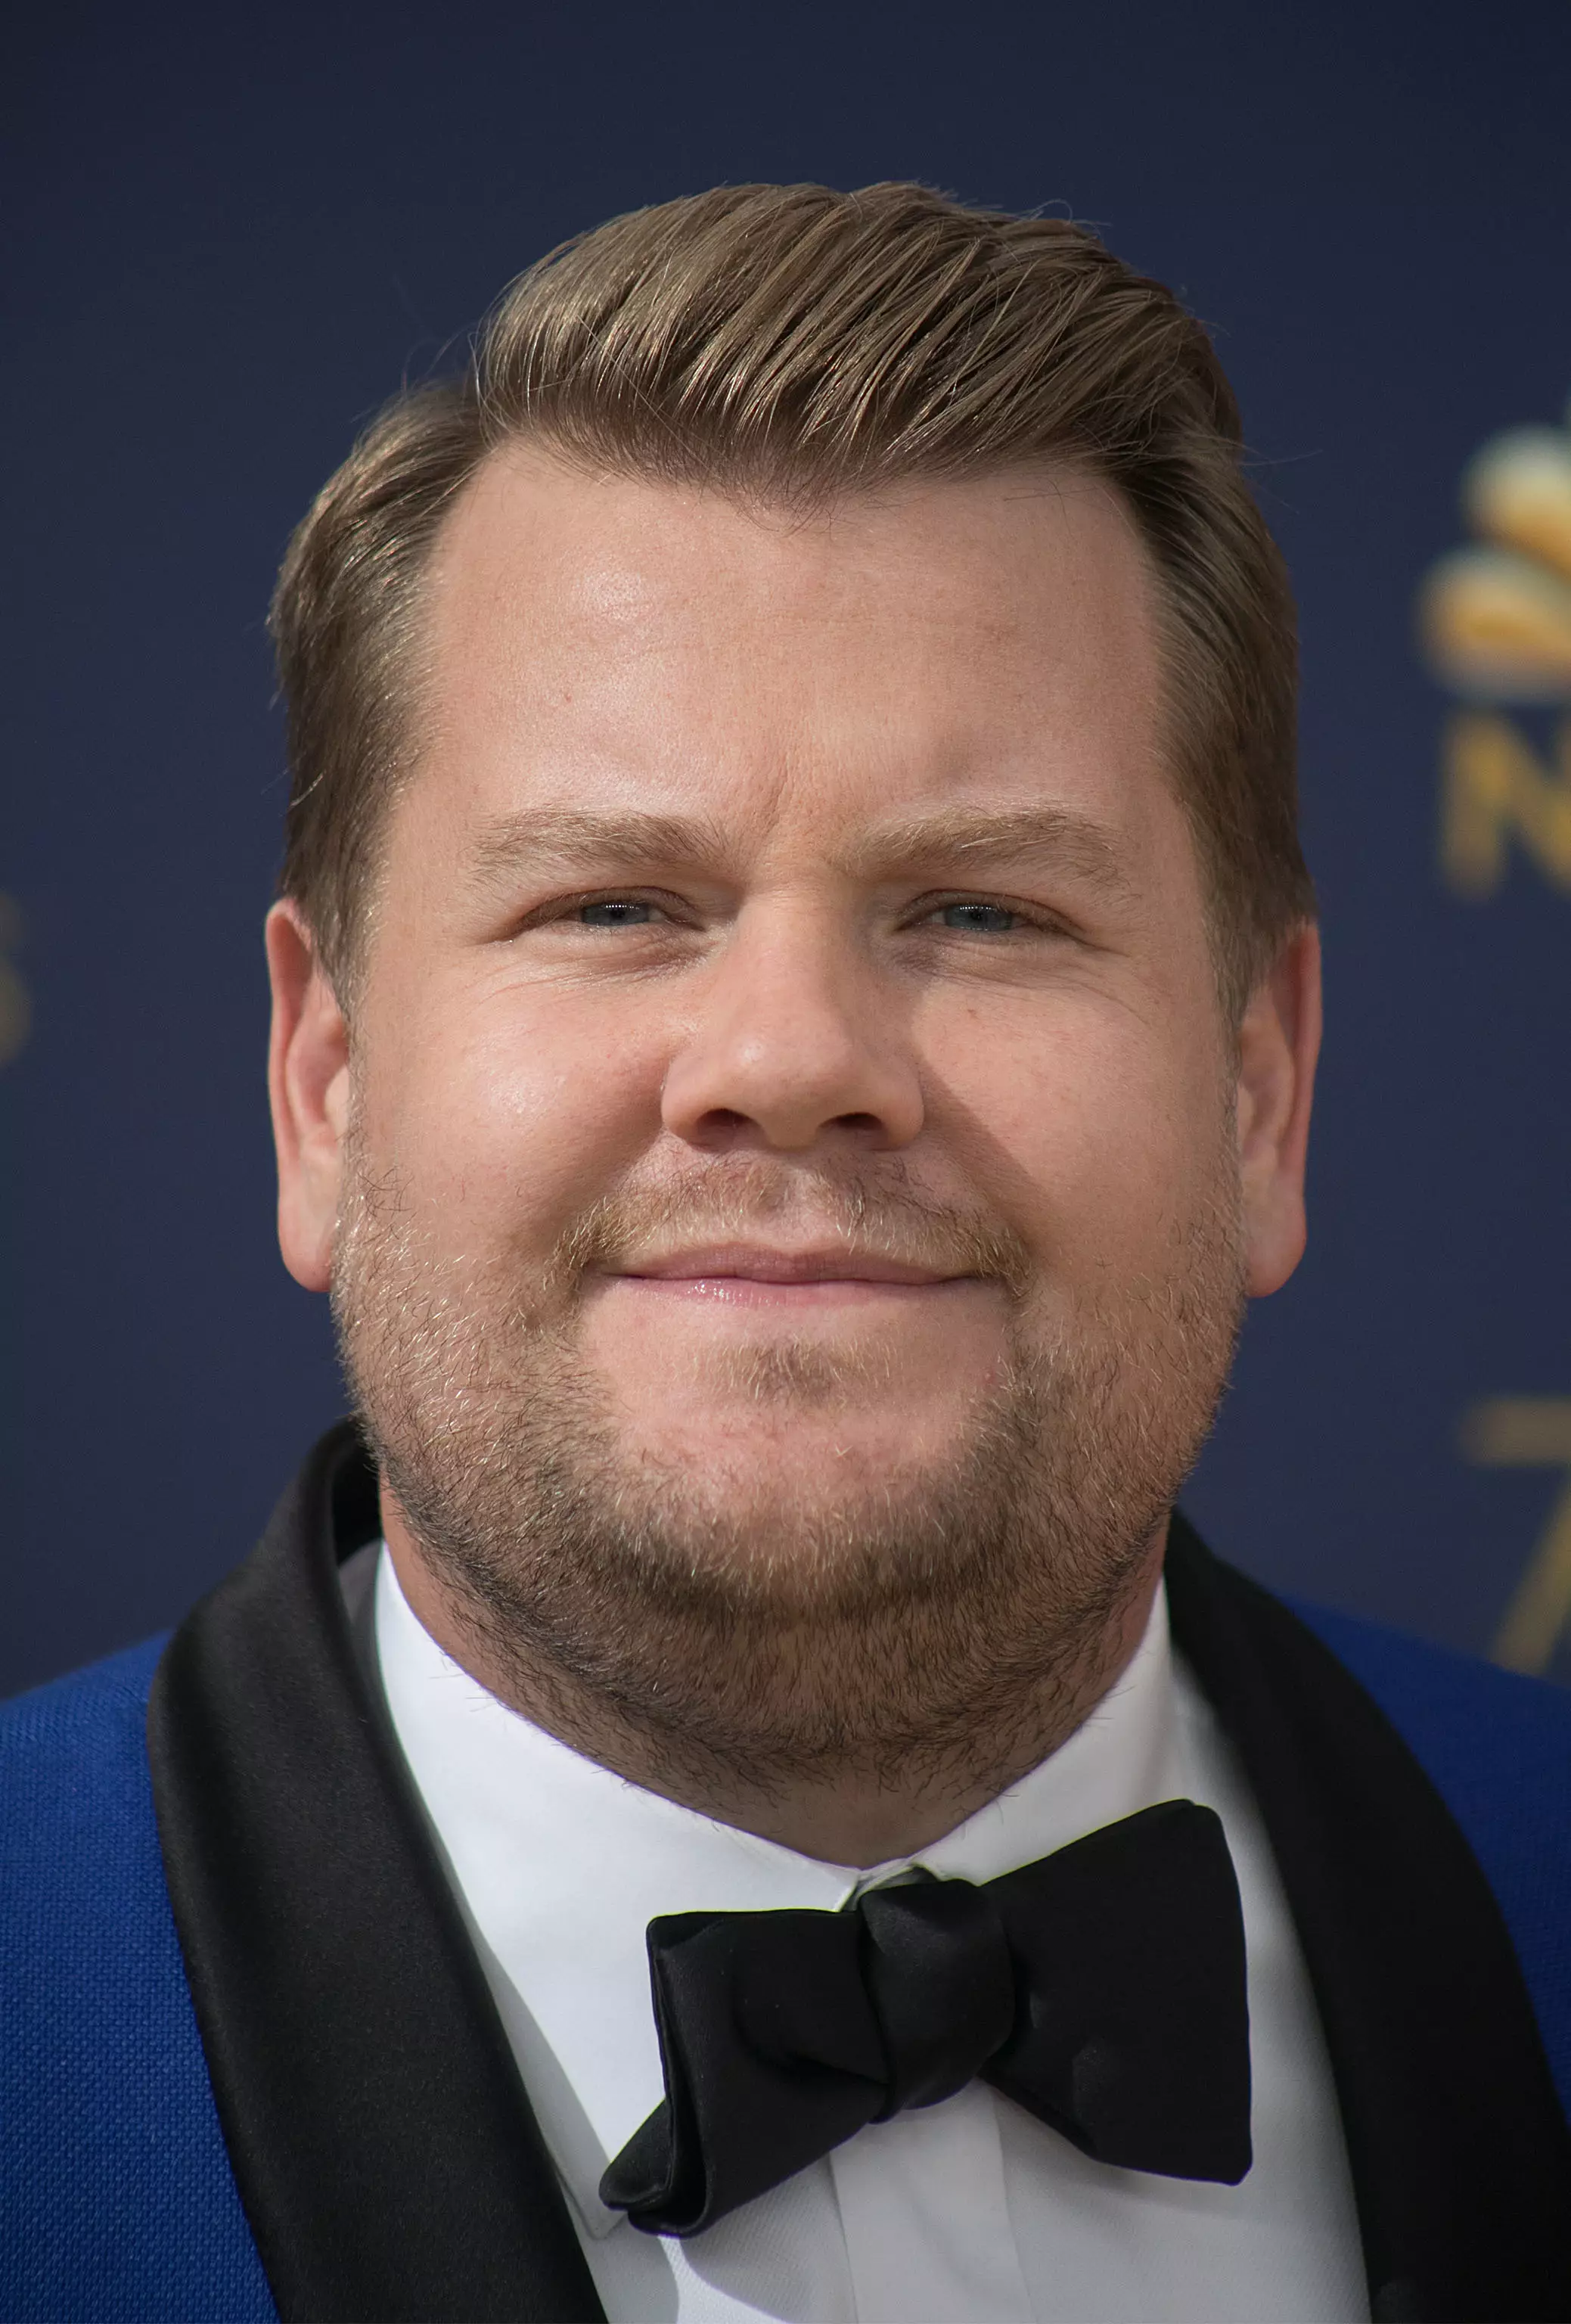 Corden was left shocked that someone could say something so awful.